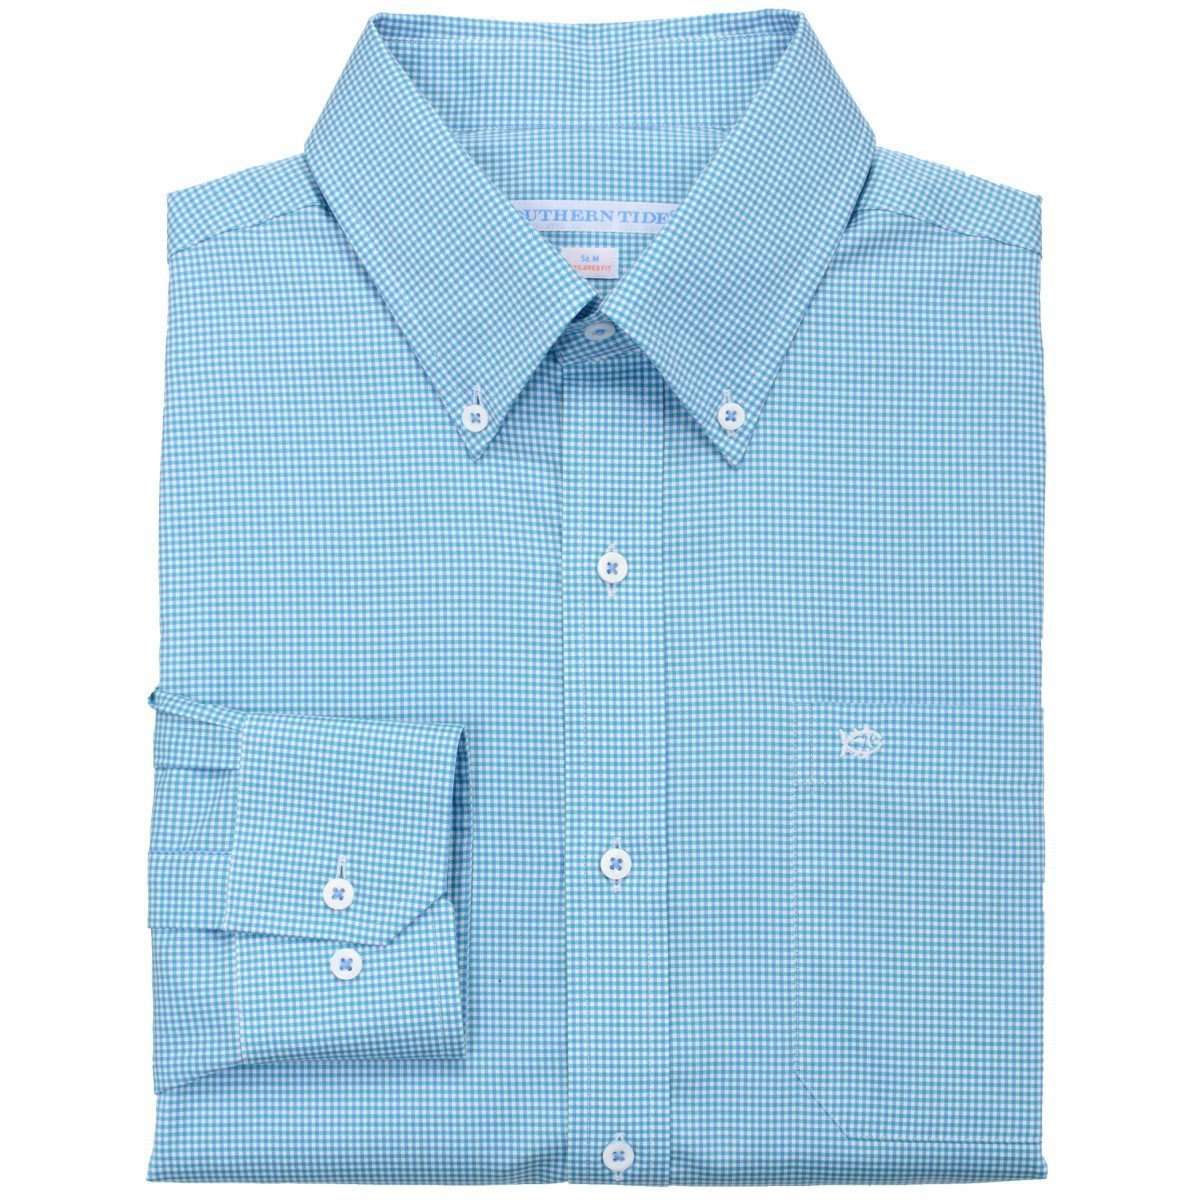 Southern Tide Sea Island Check Classic Fit Sport Shirt in Tidal Wave